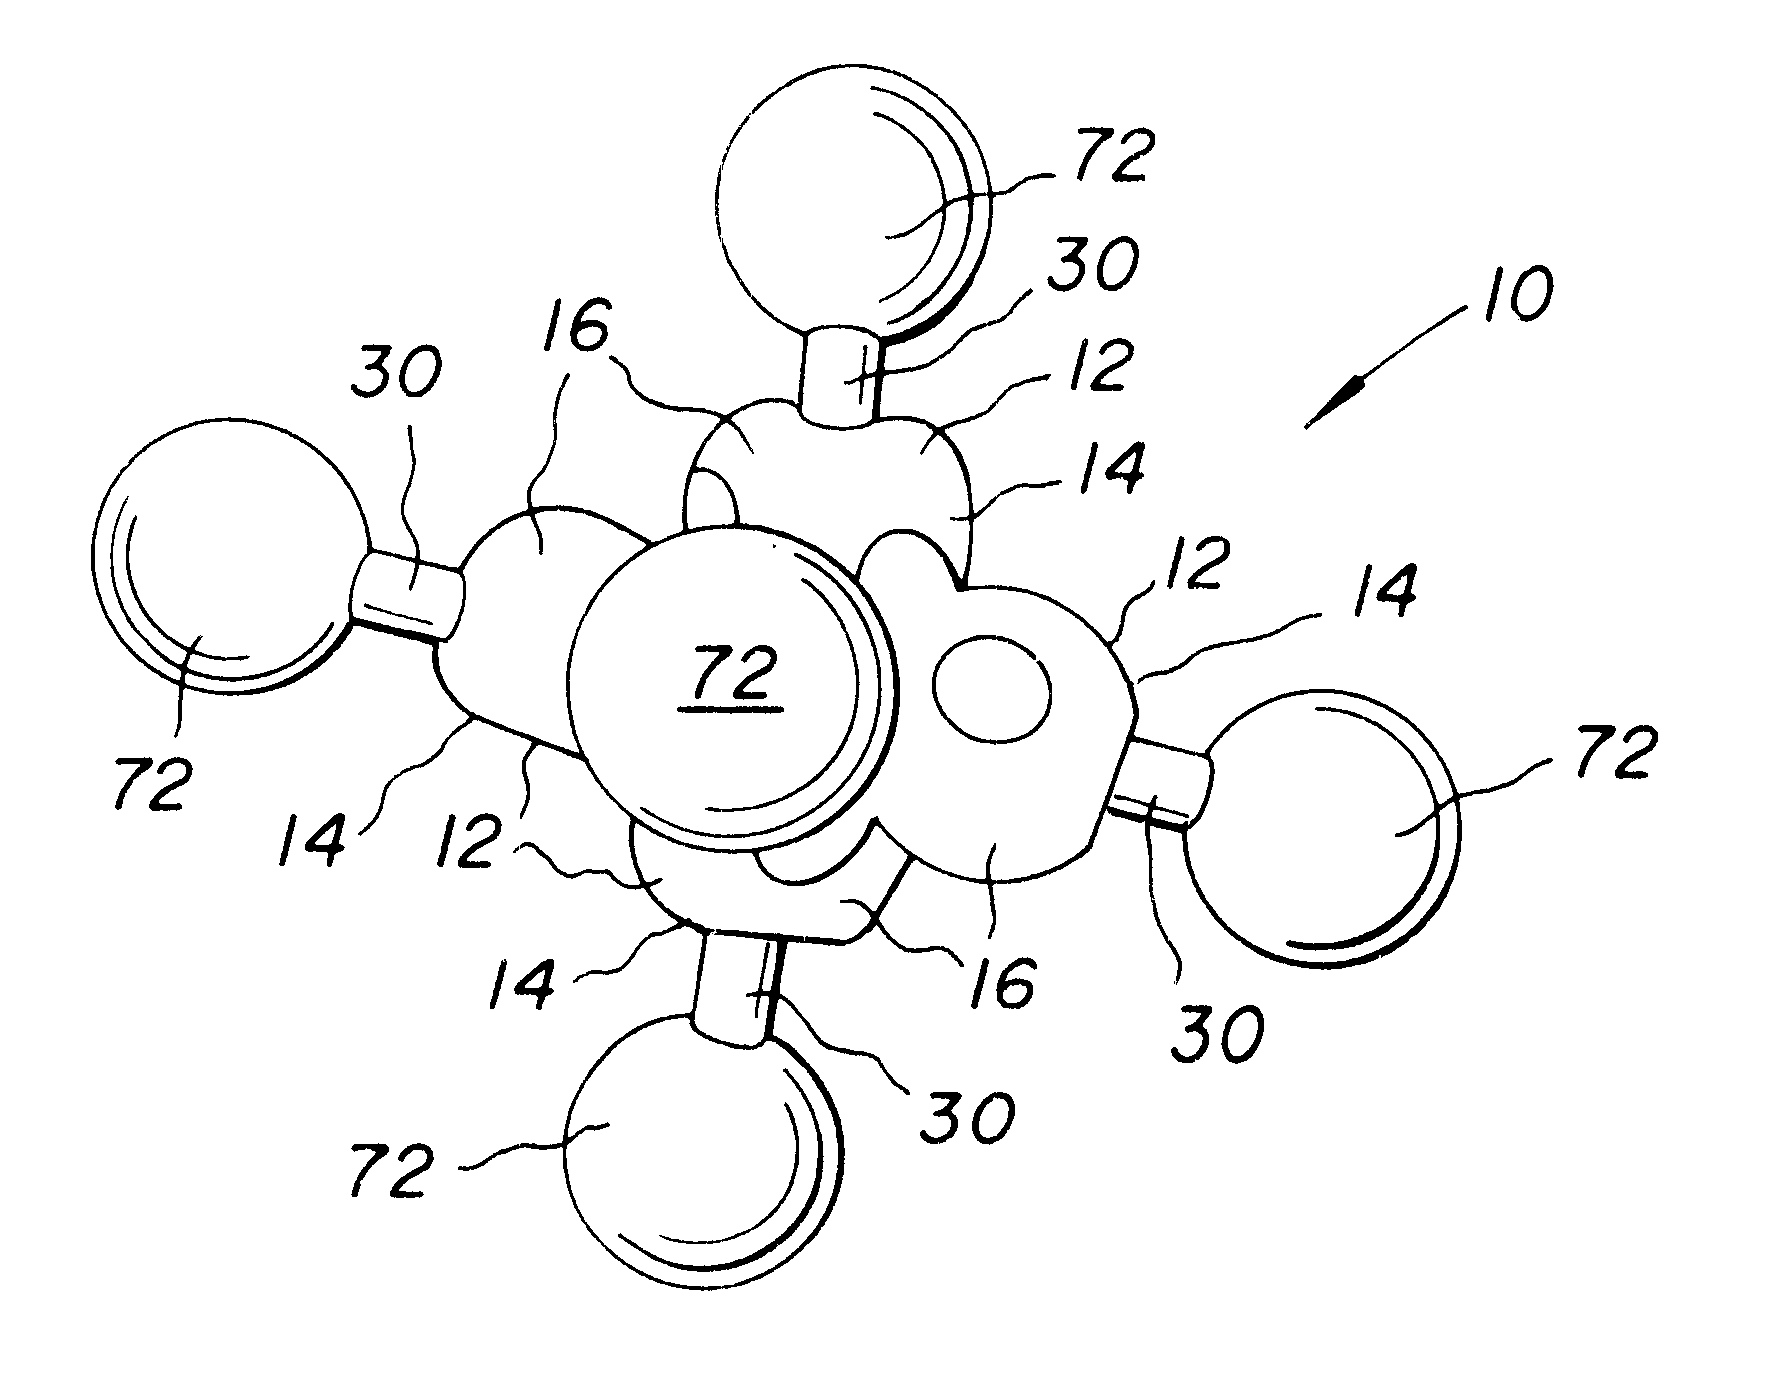 Toy comprising interconnected figures having directionally selectable spring-loaded propulsion mechanisms